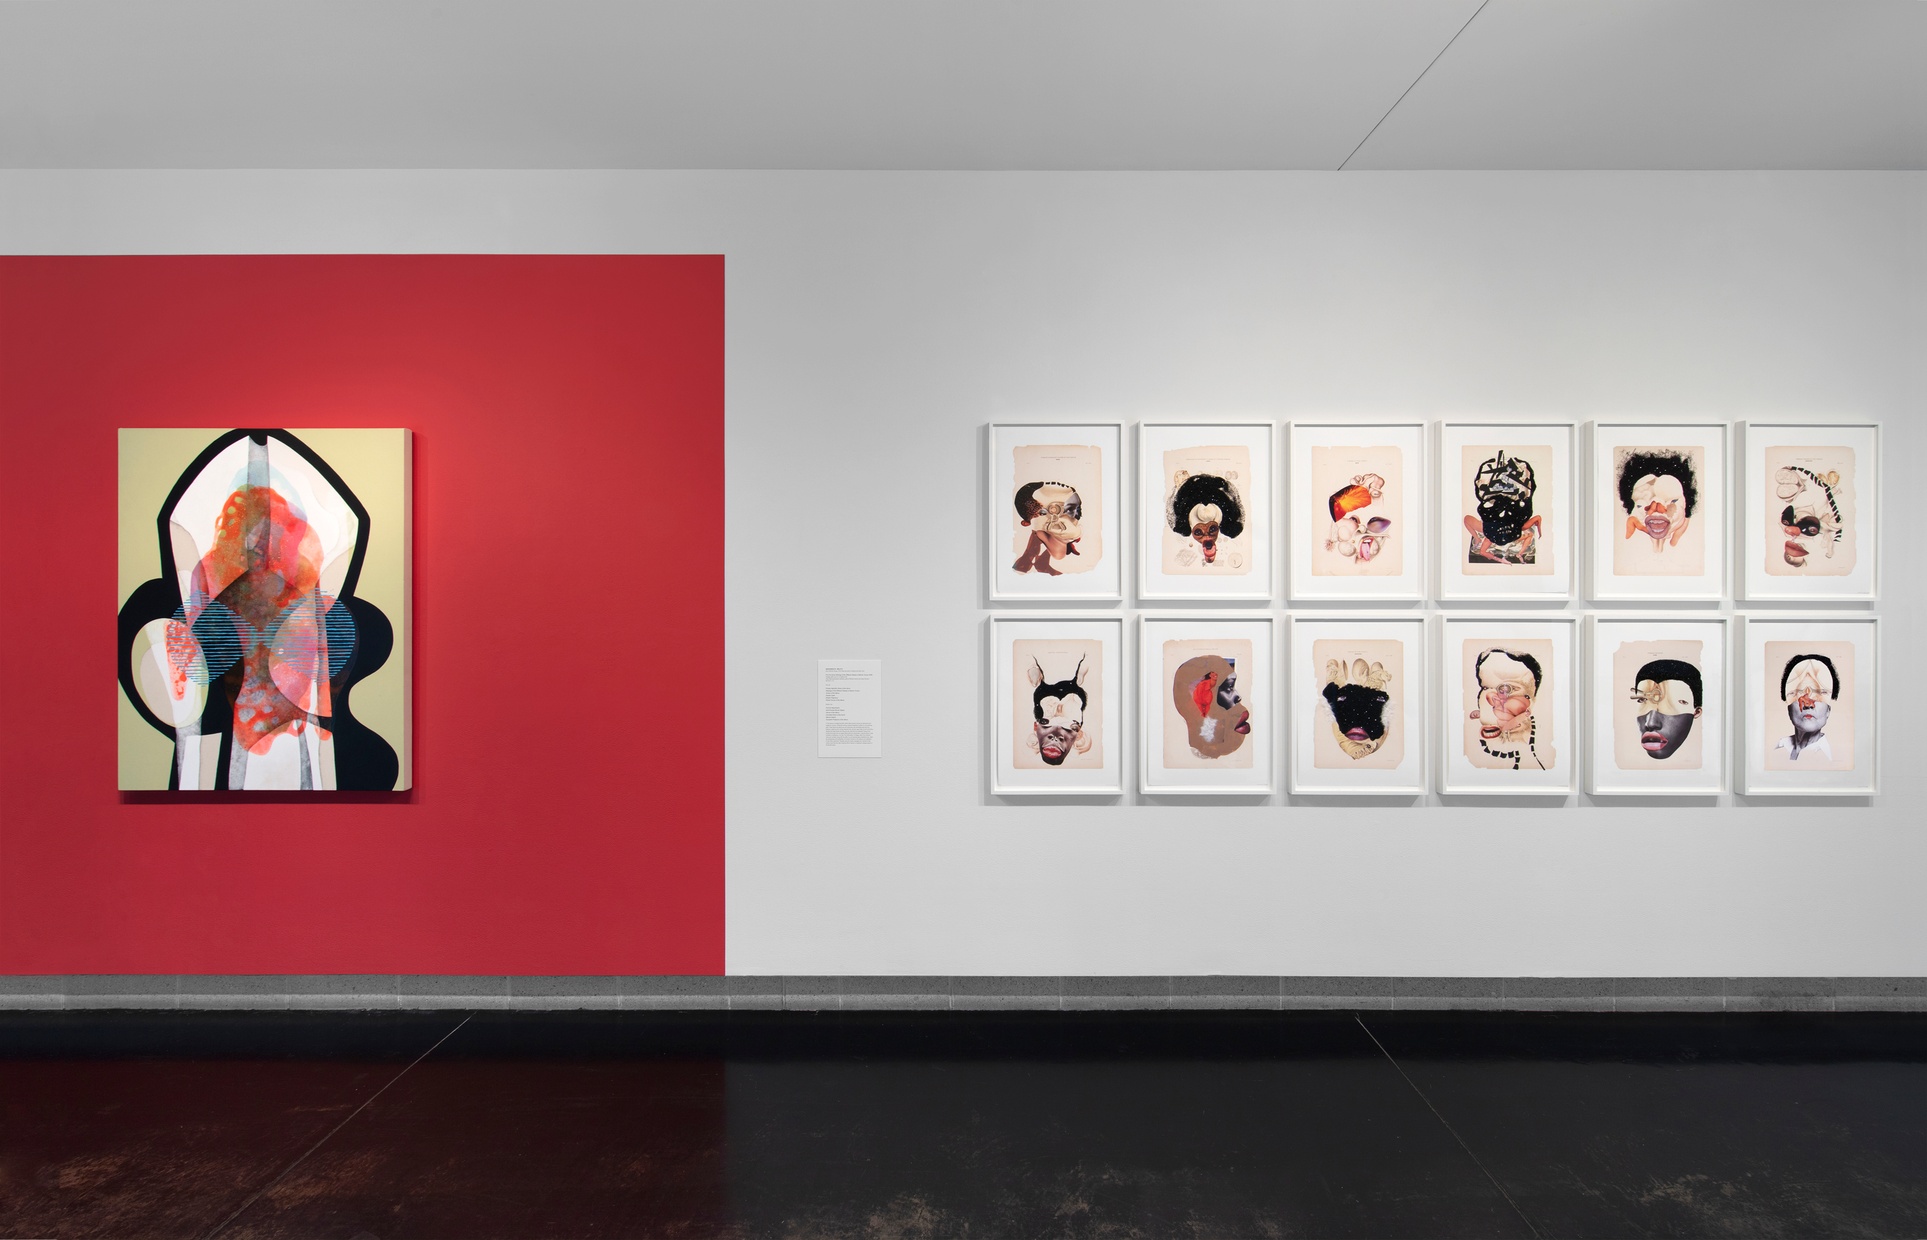 on the right, a white gallery wall with twelve framed collages by Wangechi Mutu hung neatly in two rows. On the left, a portion of the wall is painted red where a bright, abstract painting by Carrie Moyer hangs